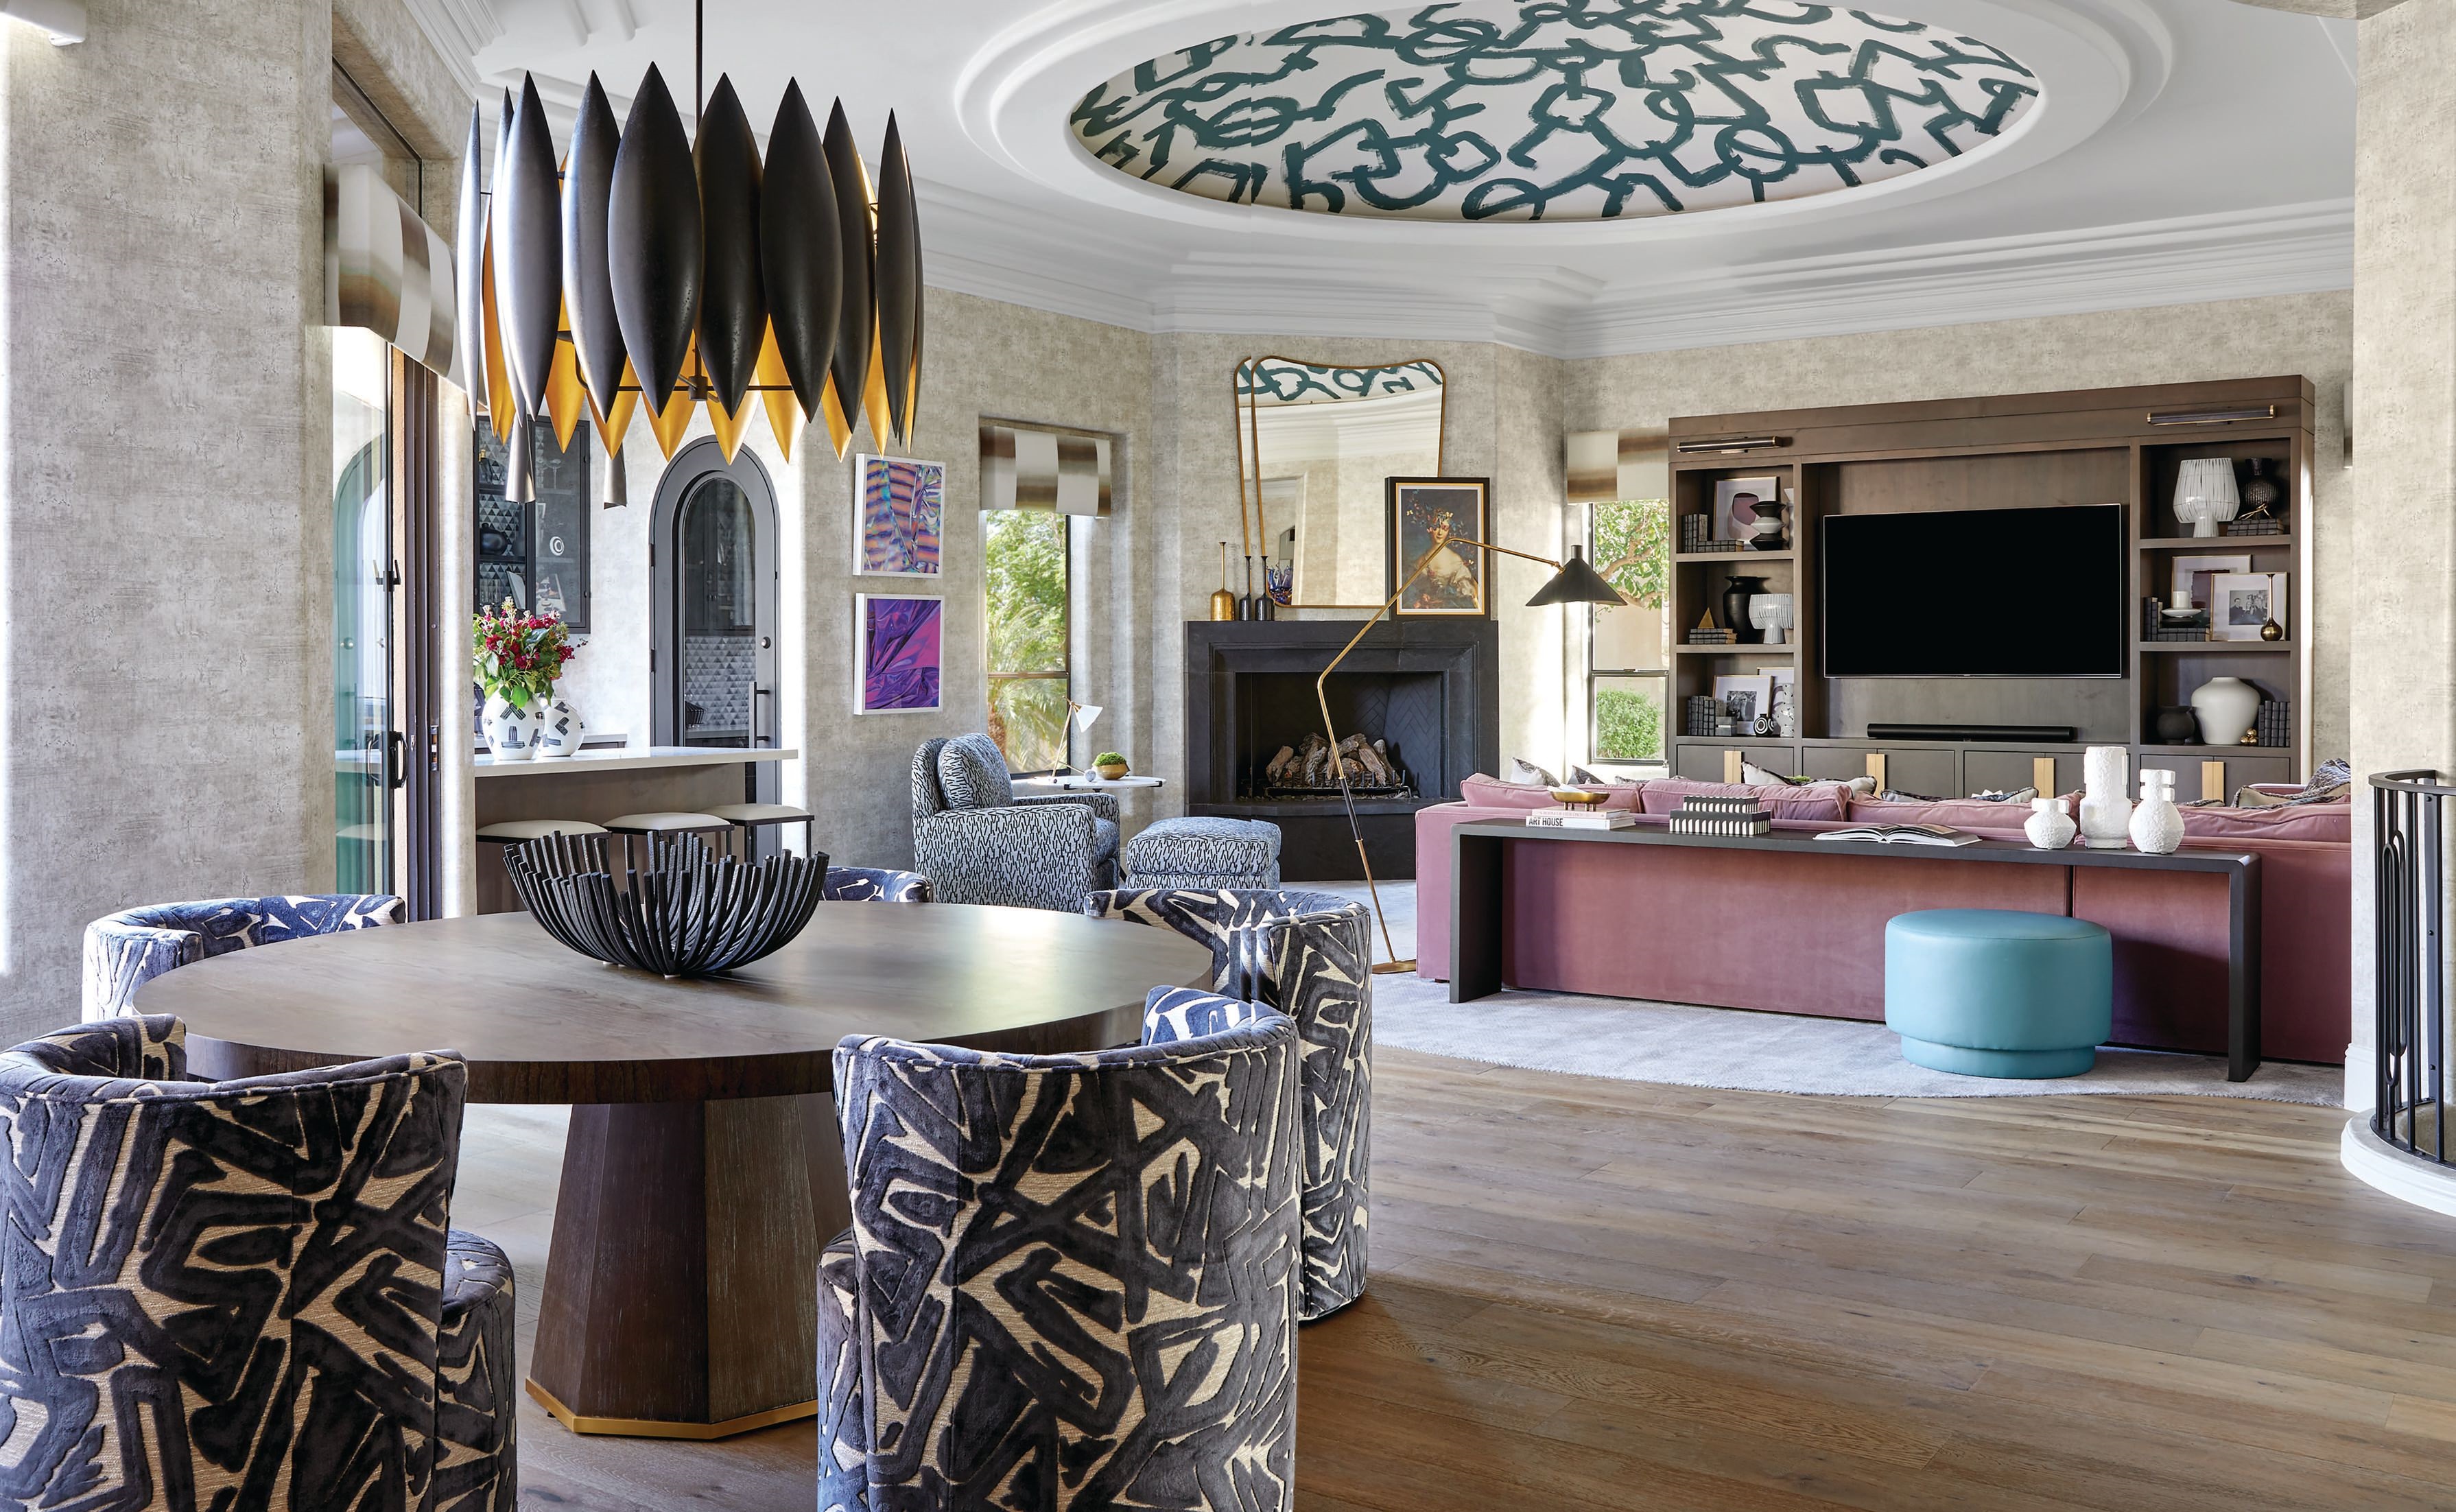 Bold patterns and textures define the great room, where Simon chose graphic dining chairs and turquoise ottomans from CR Laine. The oversize floor lamp is from Visual Comfort, and the custom mauve sofa was designed by Britany Simon Design House and upholstered in S. Harris velvet. Photographed by Laura Moss